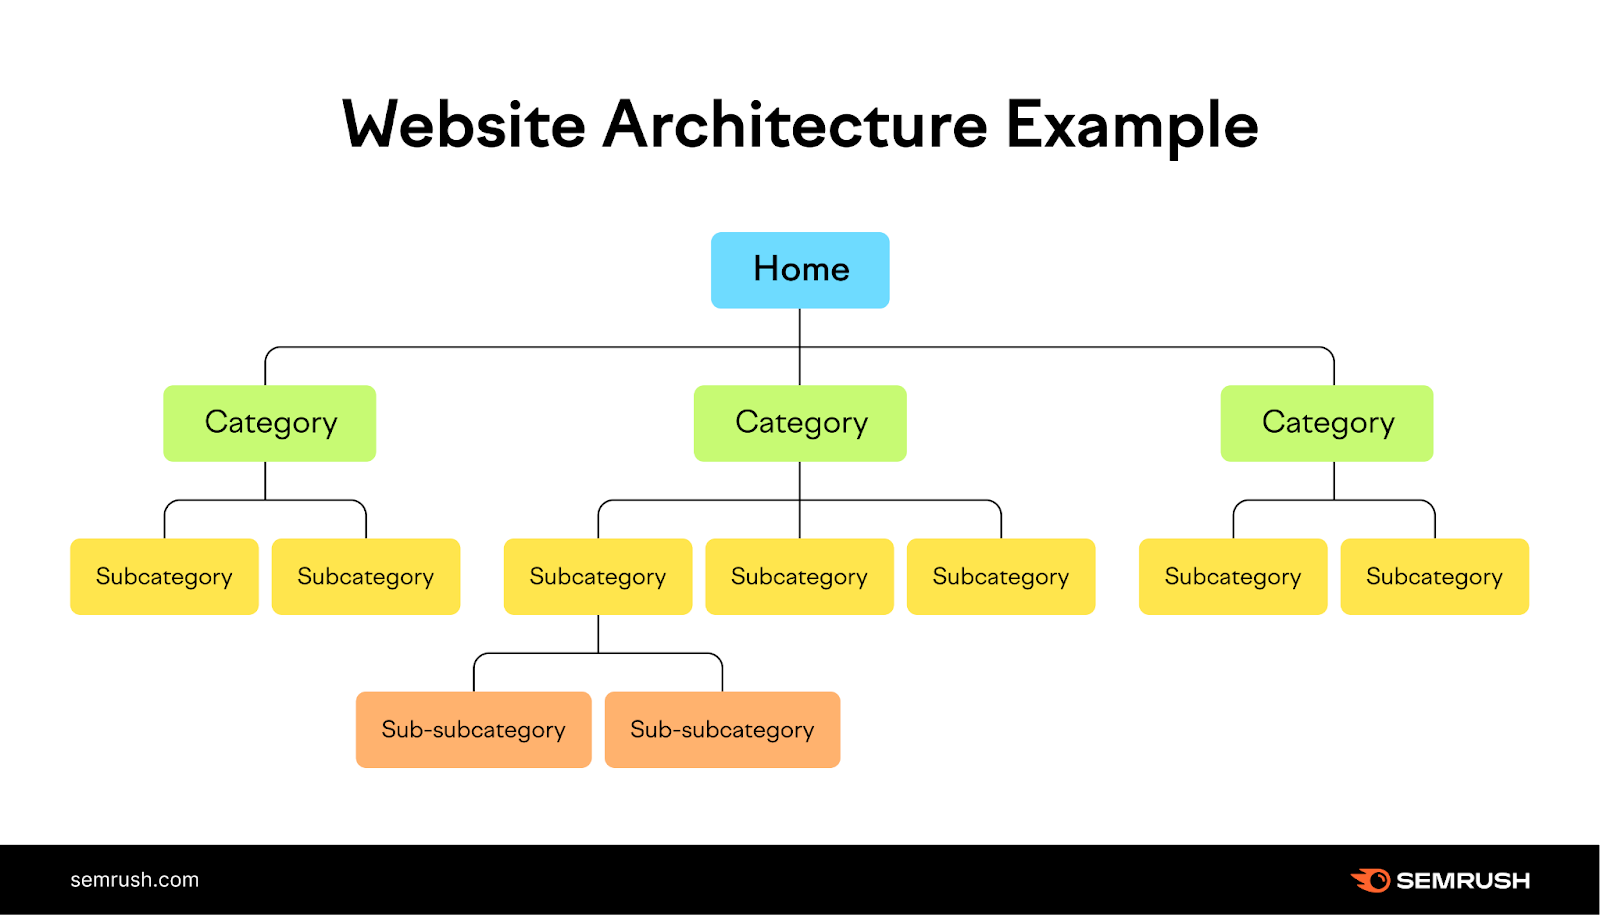 A Clear website structure example